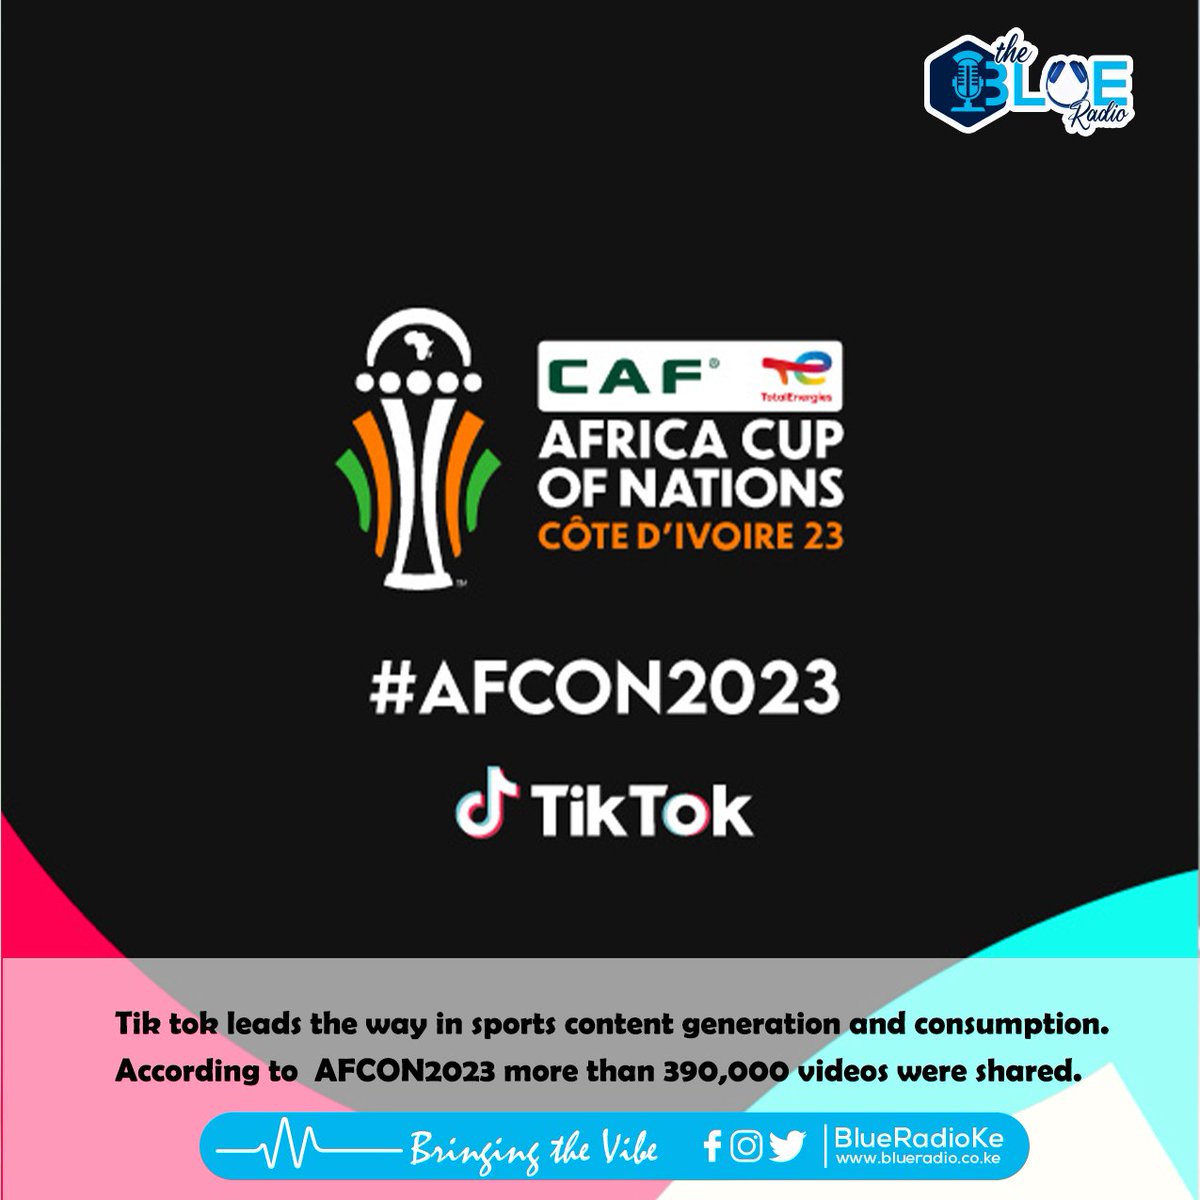 To say TikTok is taking over would be an understatement. AFCON2023 statistics prove that its growth and influence are worth their weight in gold. According to CAF more than 390,000 videos were shared and gained more than 8 million views  according to a report seen by blue radio.